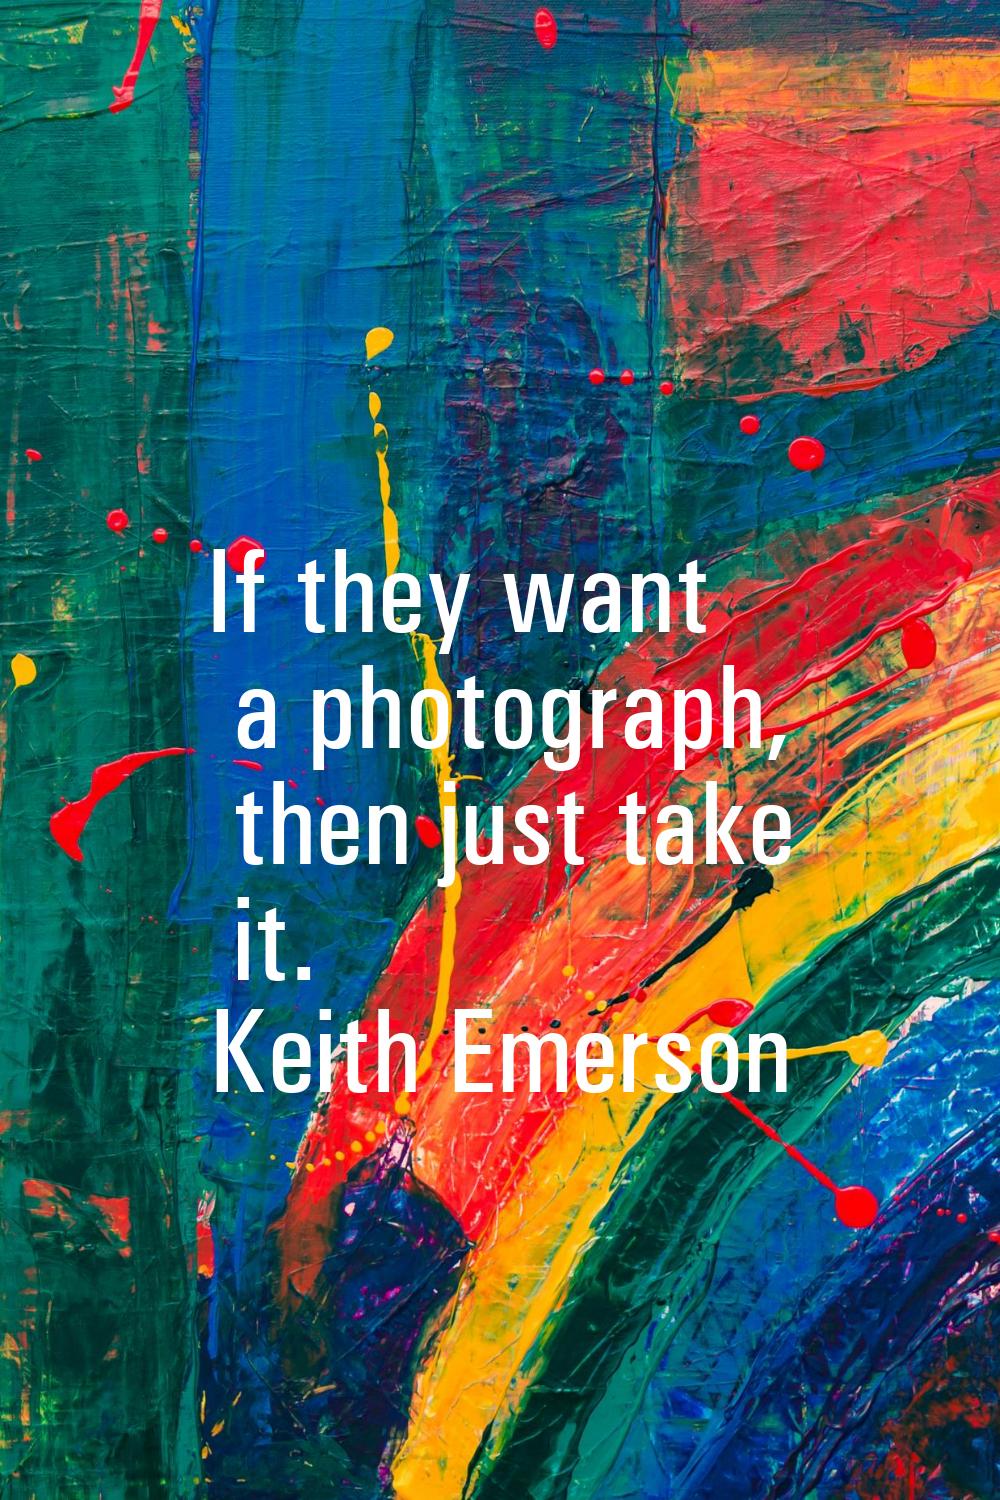 If they want a photograph, then just take it.